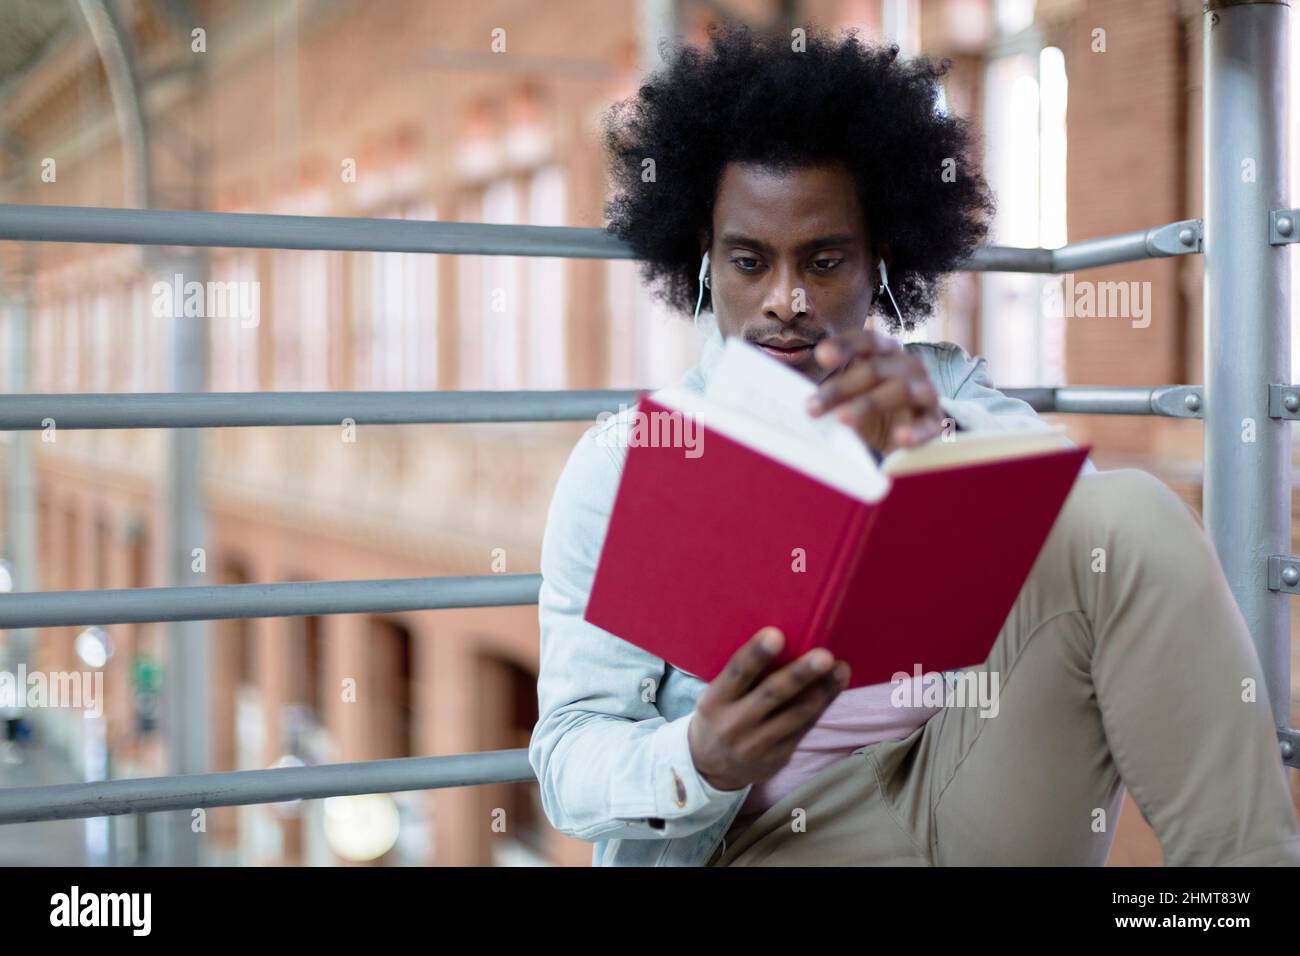 Close up of young African American man reading a book in a public place. Hobbies and healthy lifestyles. Space for text. Stock Photo